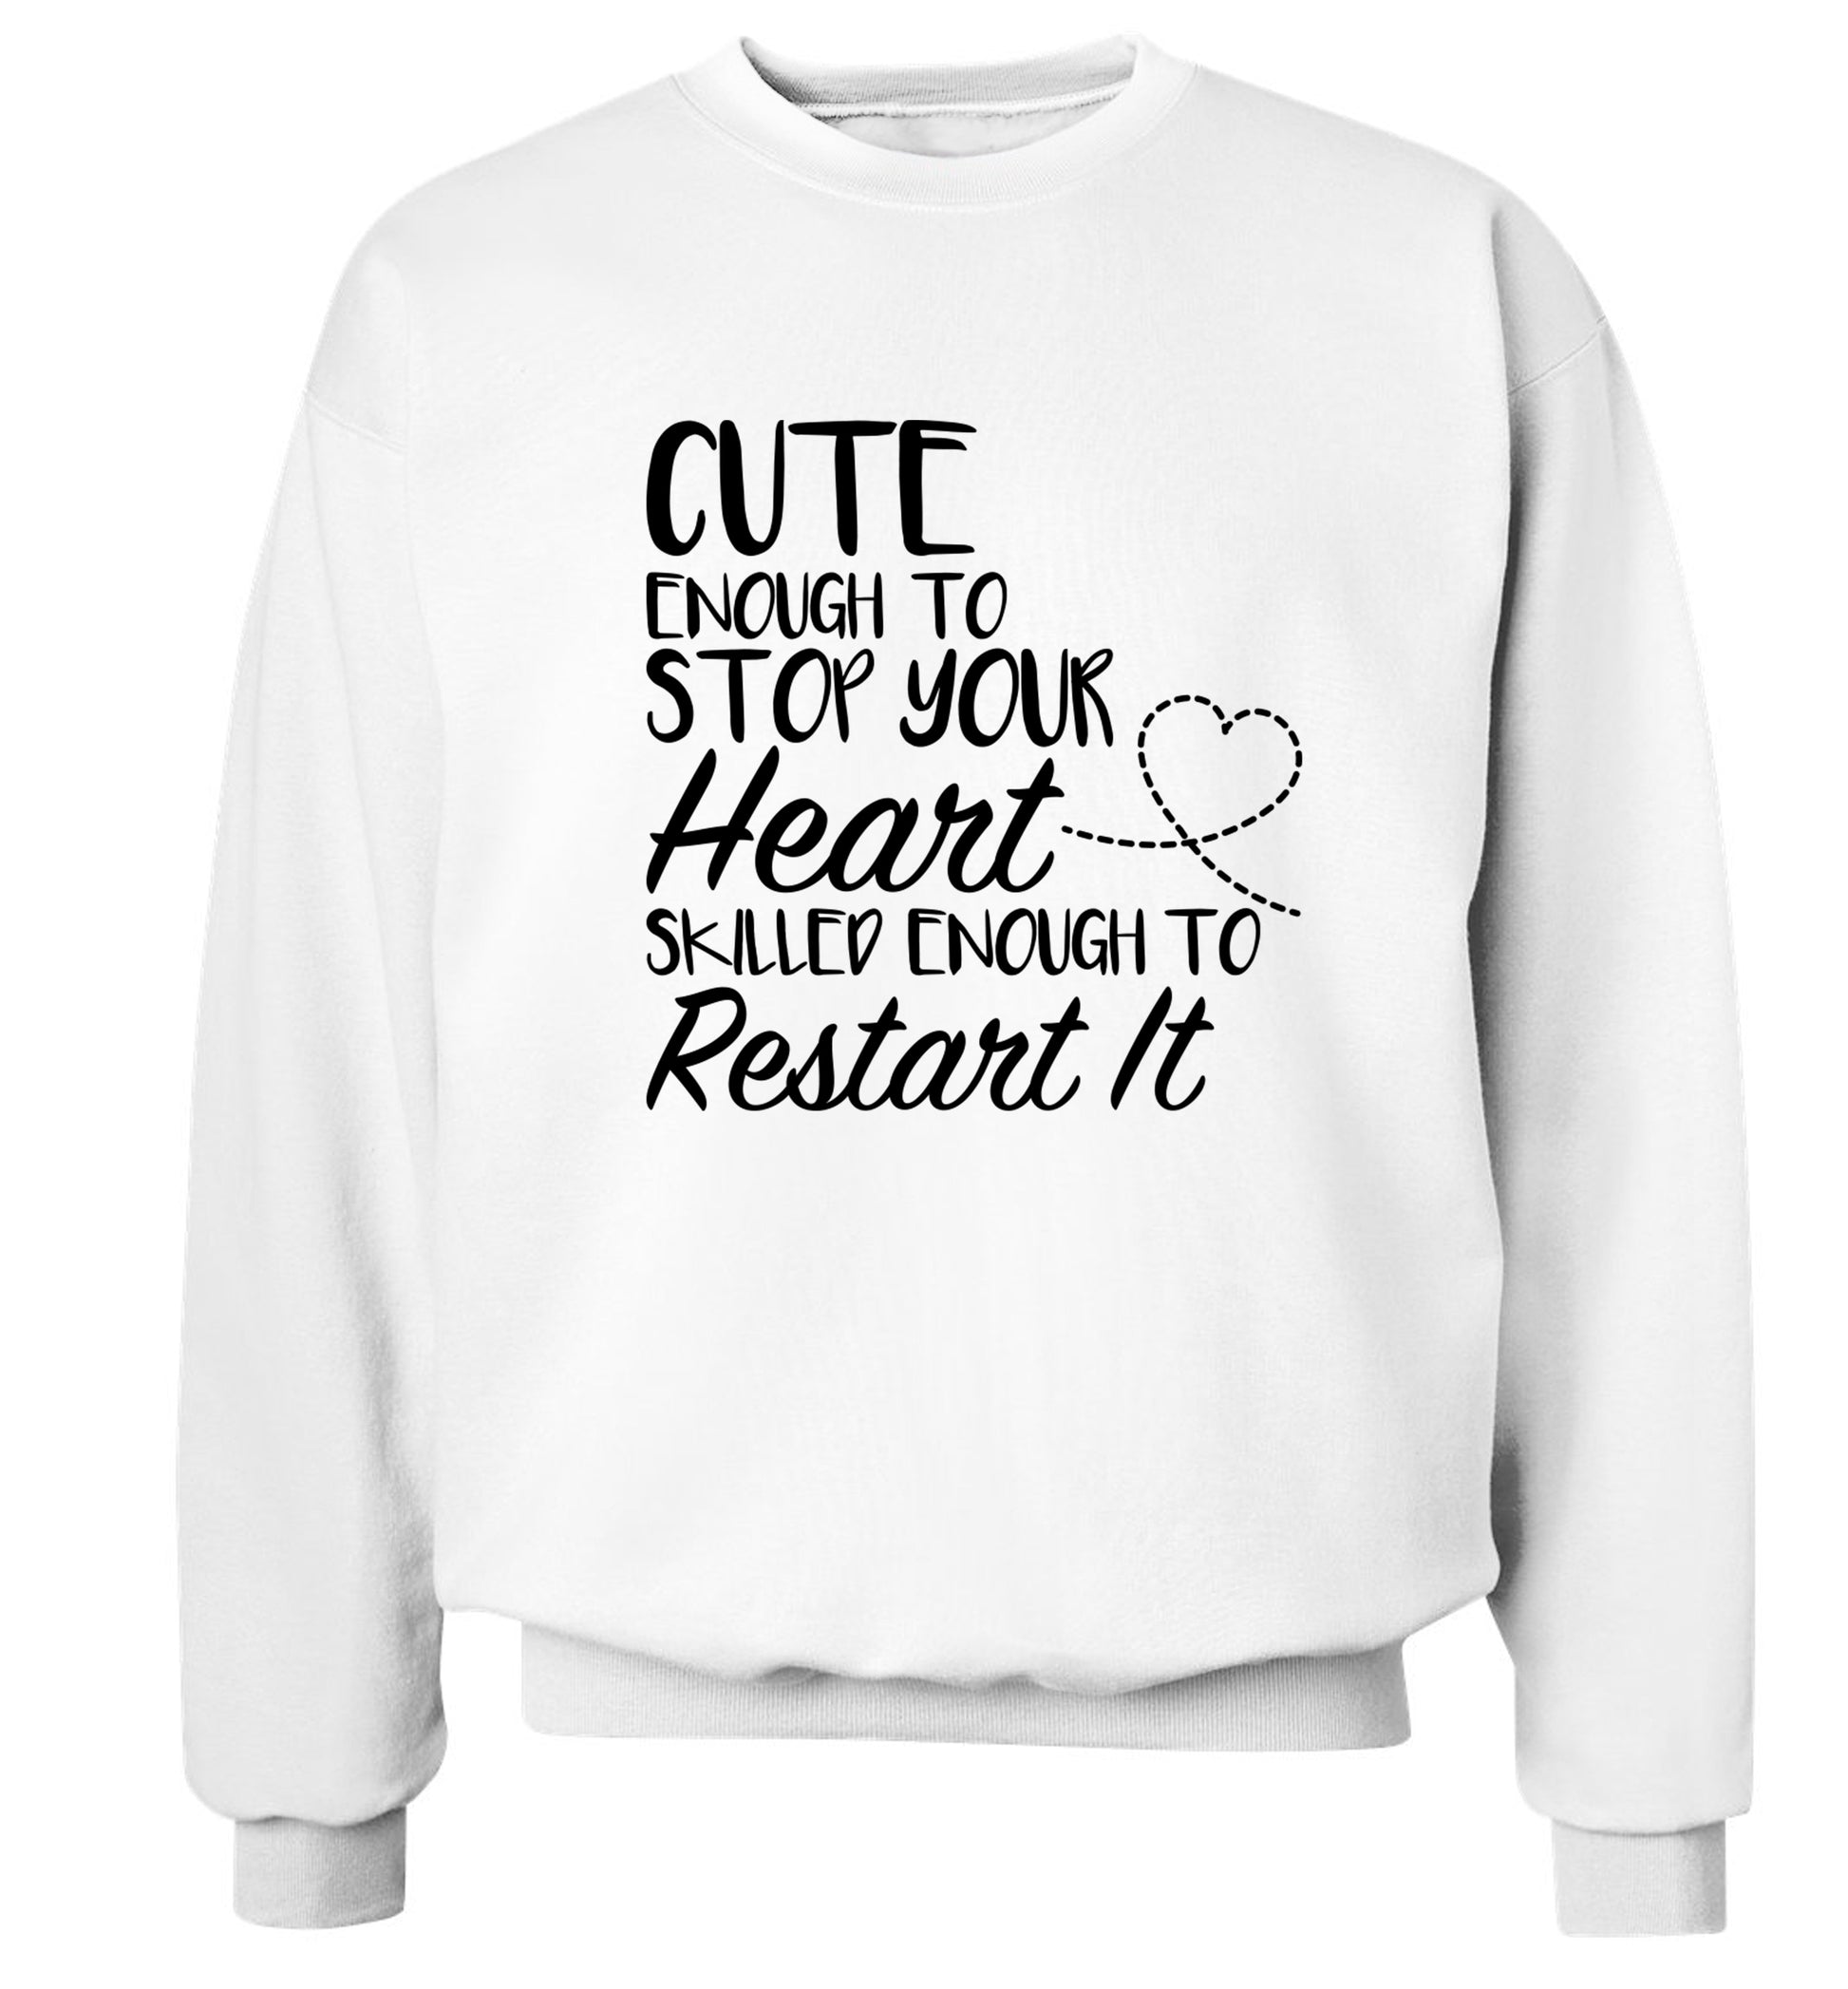 Cute enough to stop your heart skilled enough to restart it Adult's unisex white Sweater 2XL